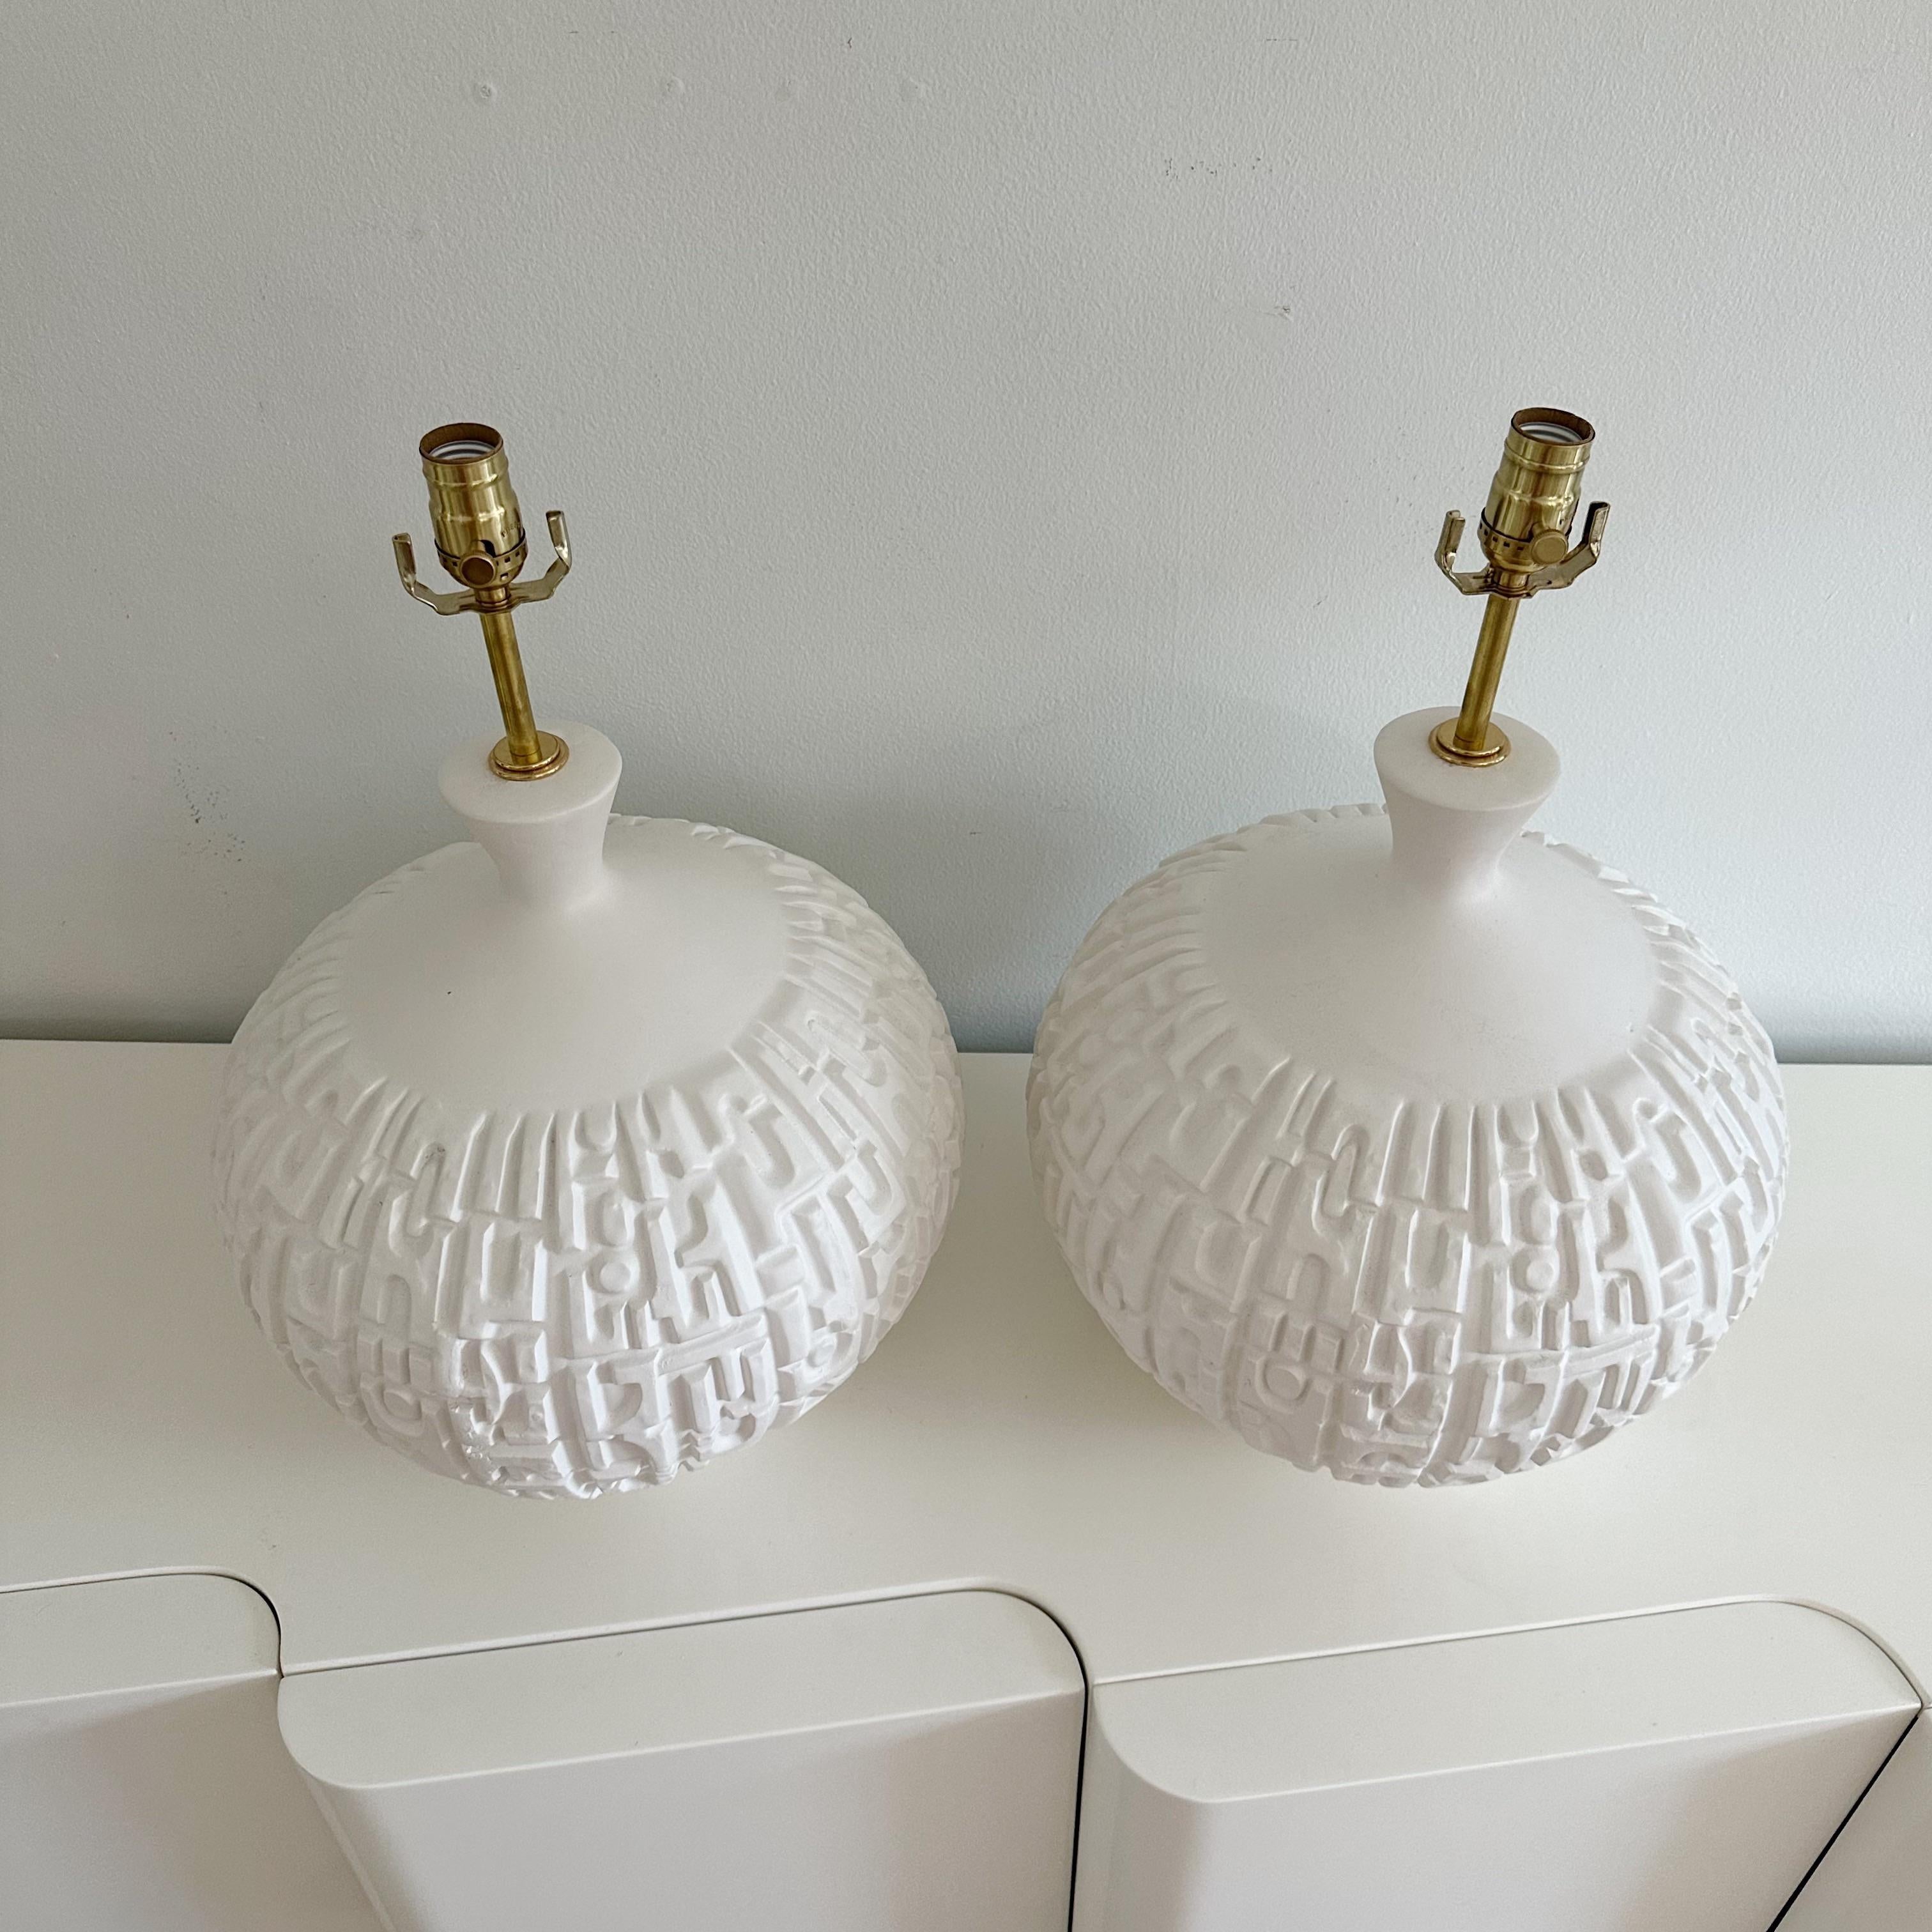 Substantial round plaster lamps from the 1970s, Featuring textured, incised, geometric brutalist design that adds a touch of artistic intrigue. Professionally rewired with a white silk cord and solid brass fittings. These lamps seamlessly blend